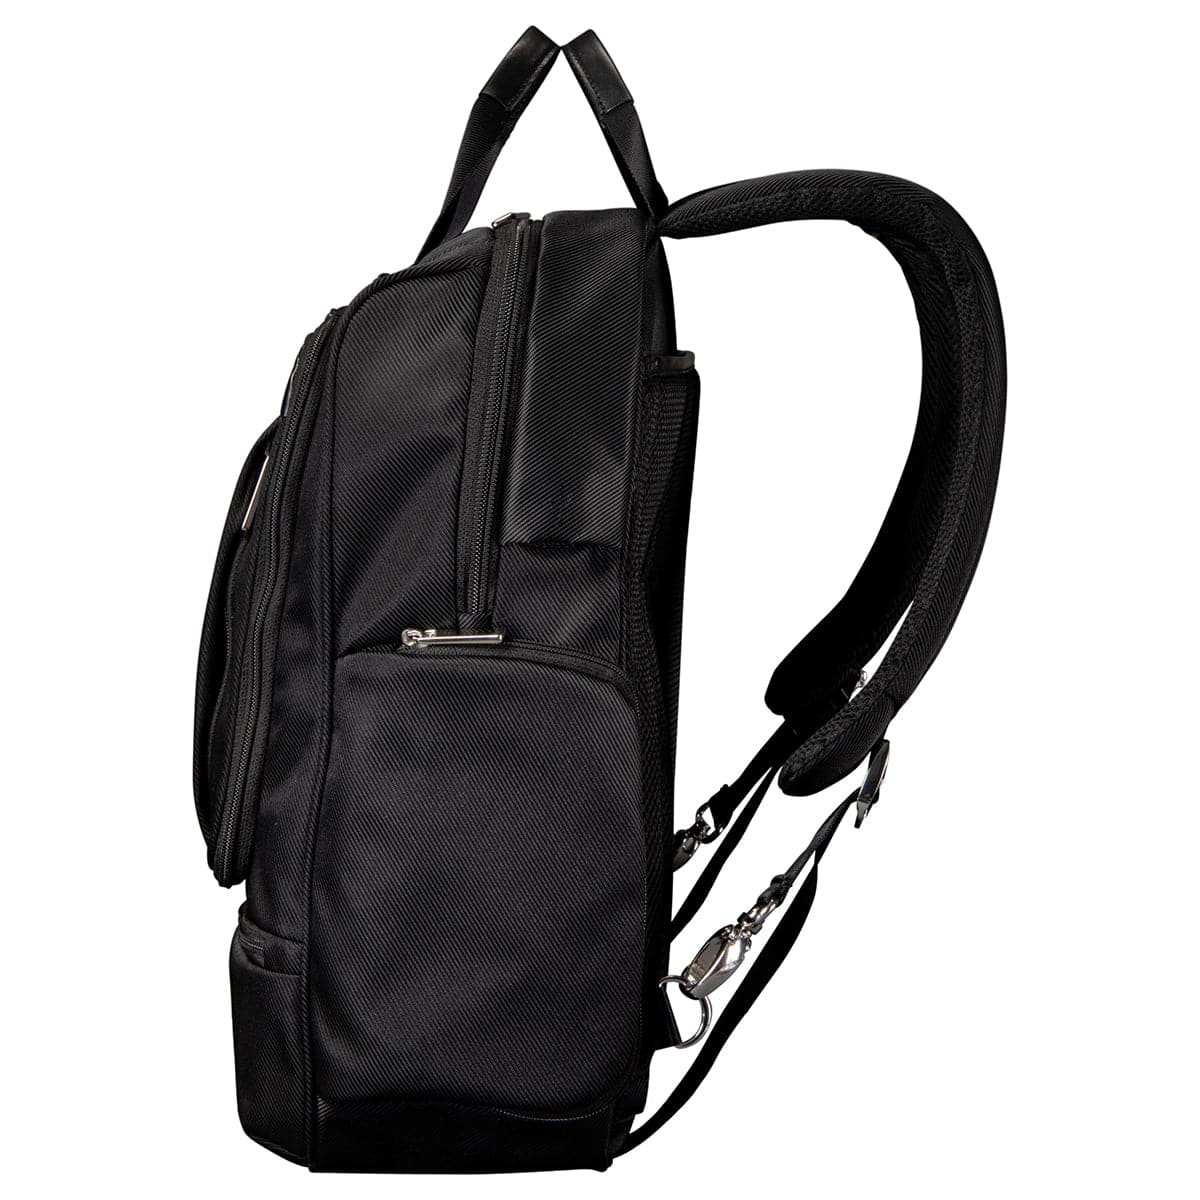 Ricardo Beverly Hills Rodeo Drive 2.0 Convertible Tech Laptop Backpack